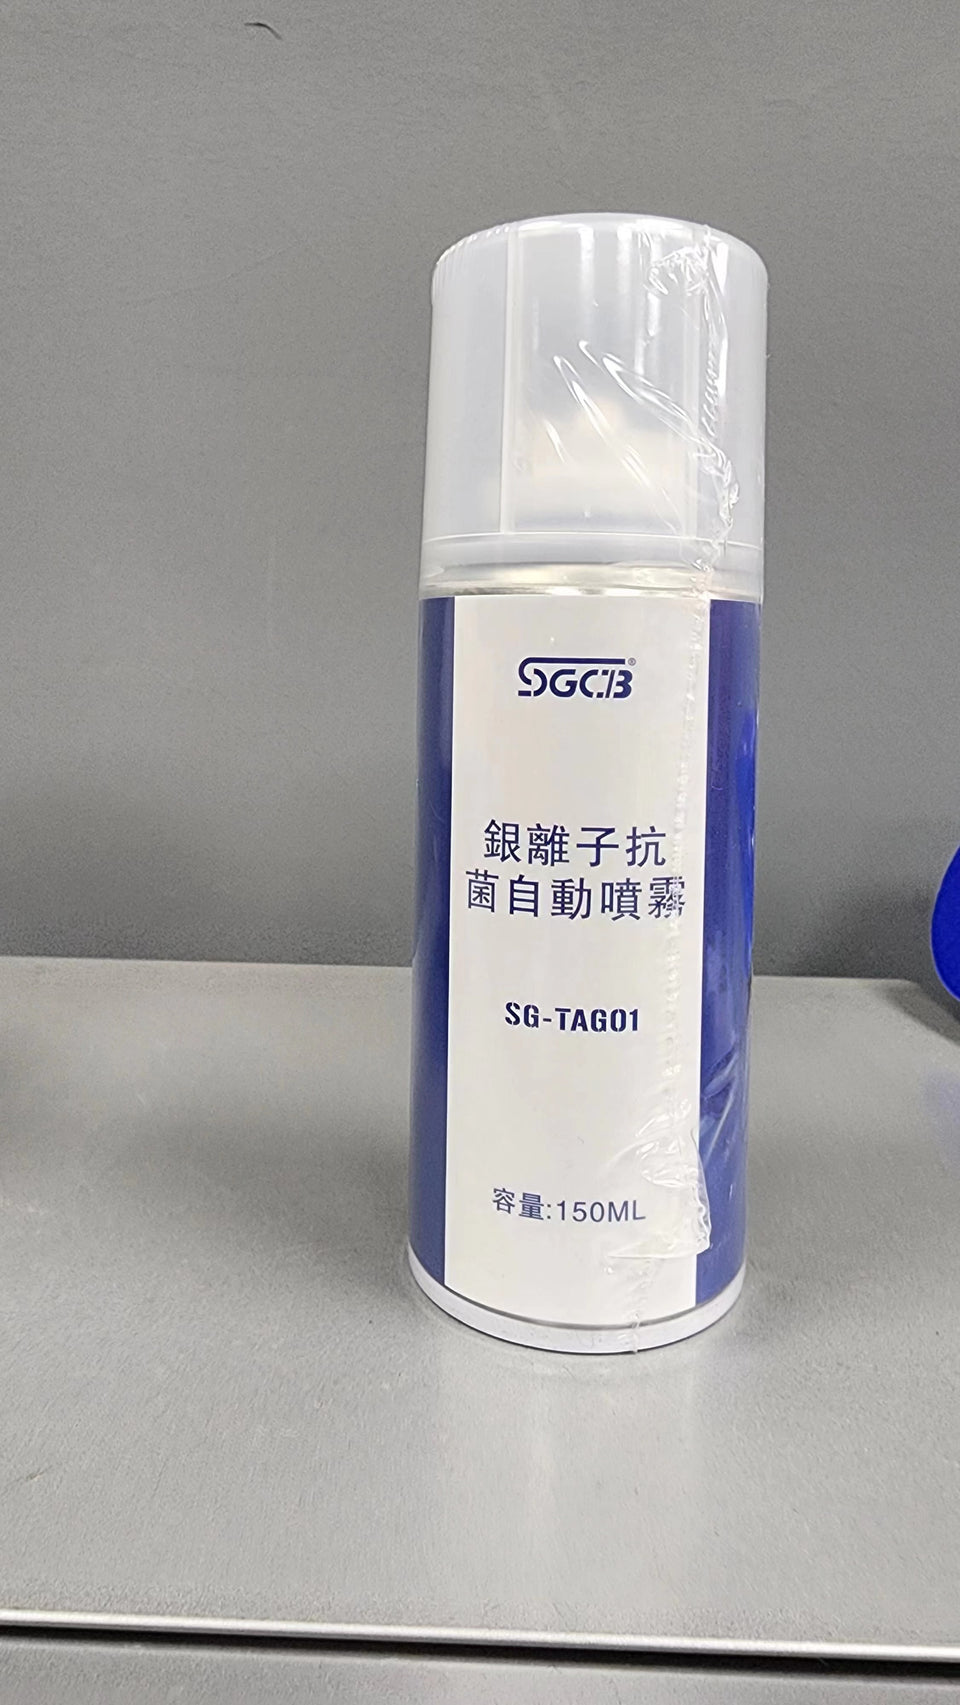 SGCB Compressed air silver ion antimicrobial spray can canned pressurized air for dusting and cleaning purposes